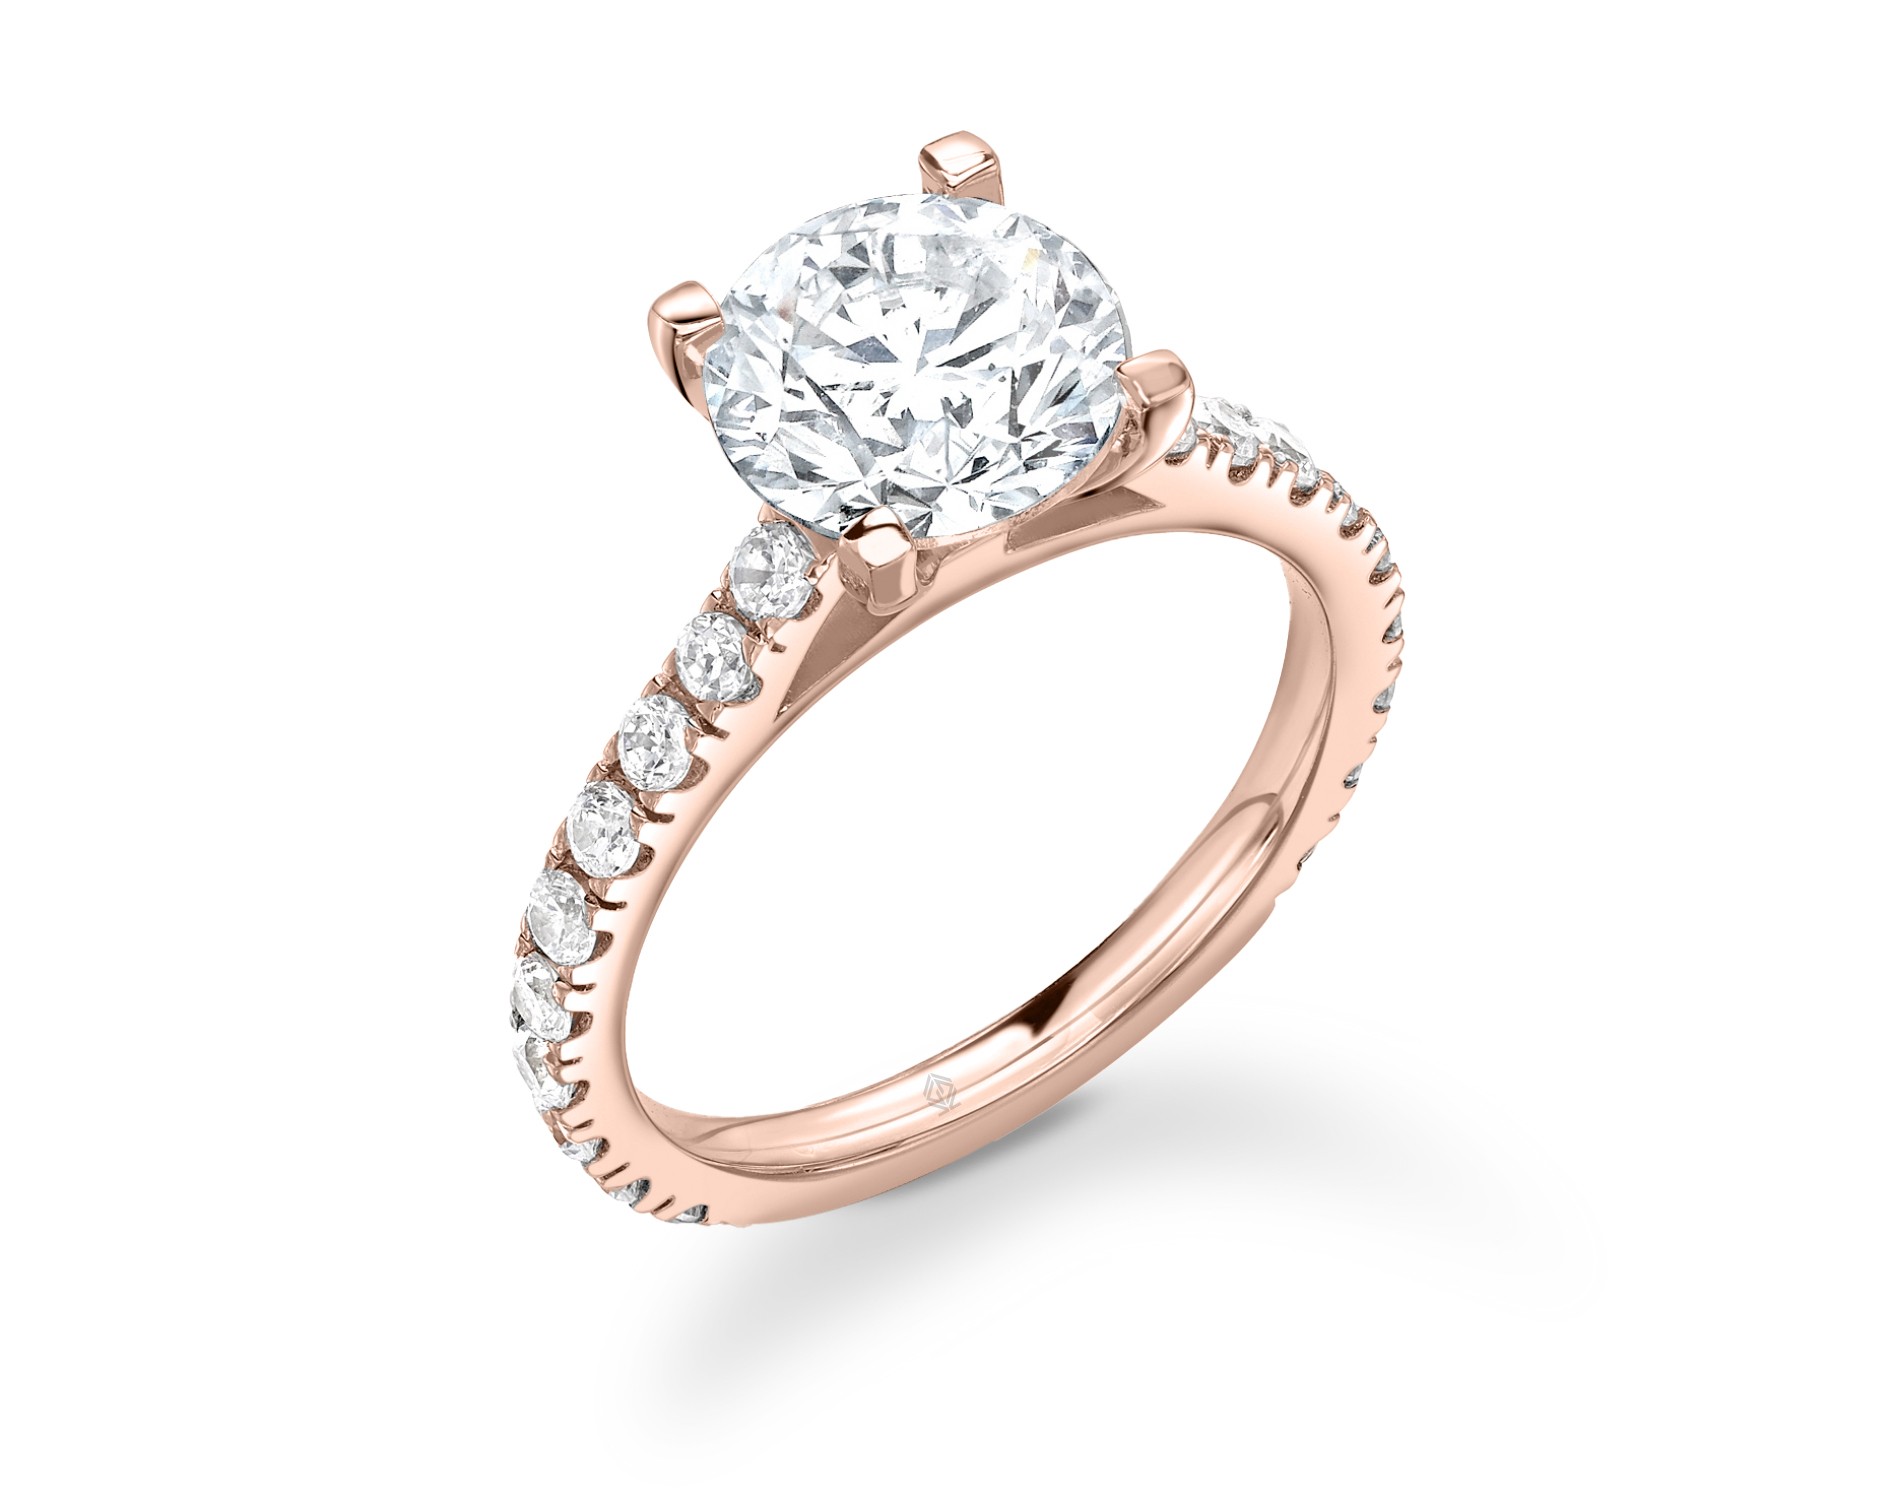 18K ROSE GOLD 18K ROSE GOLD ROUND CUT 4 PRONGS DIAMOND ENGAGEMENT RING WITH SIDE STONES PAVE SET